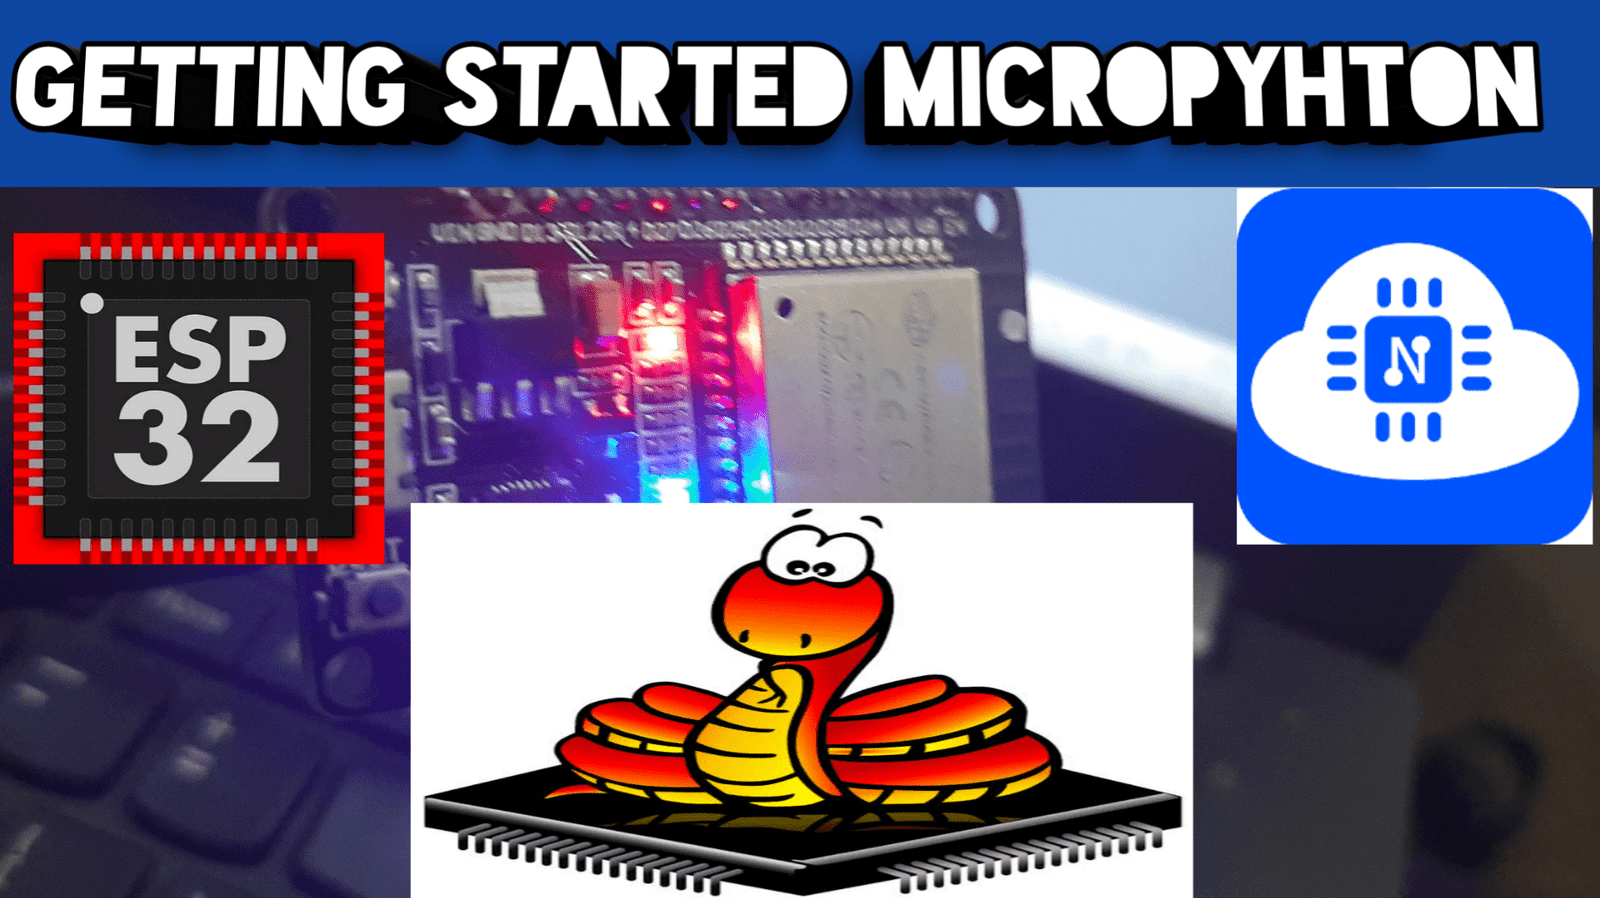 MicroPythoon with ESP32 and ESP8266